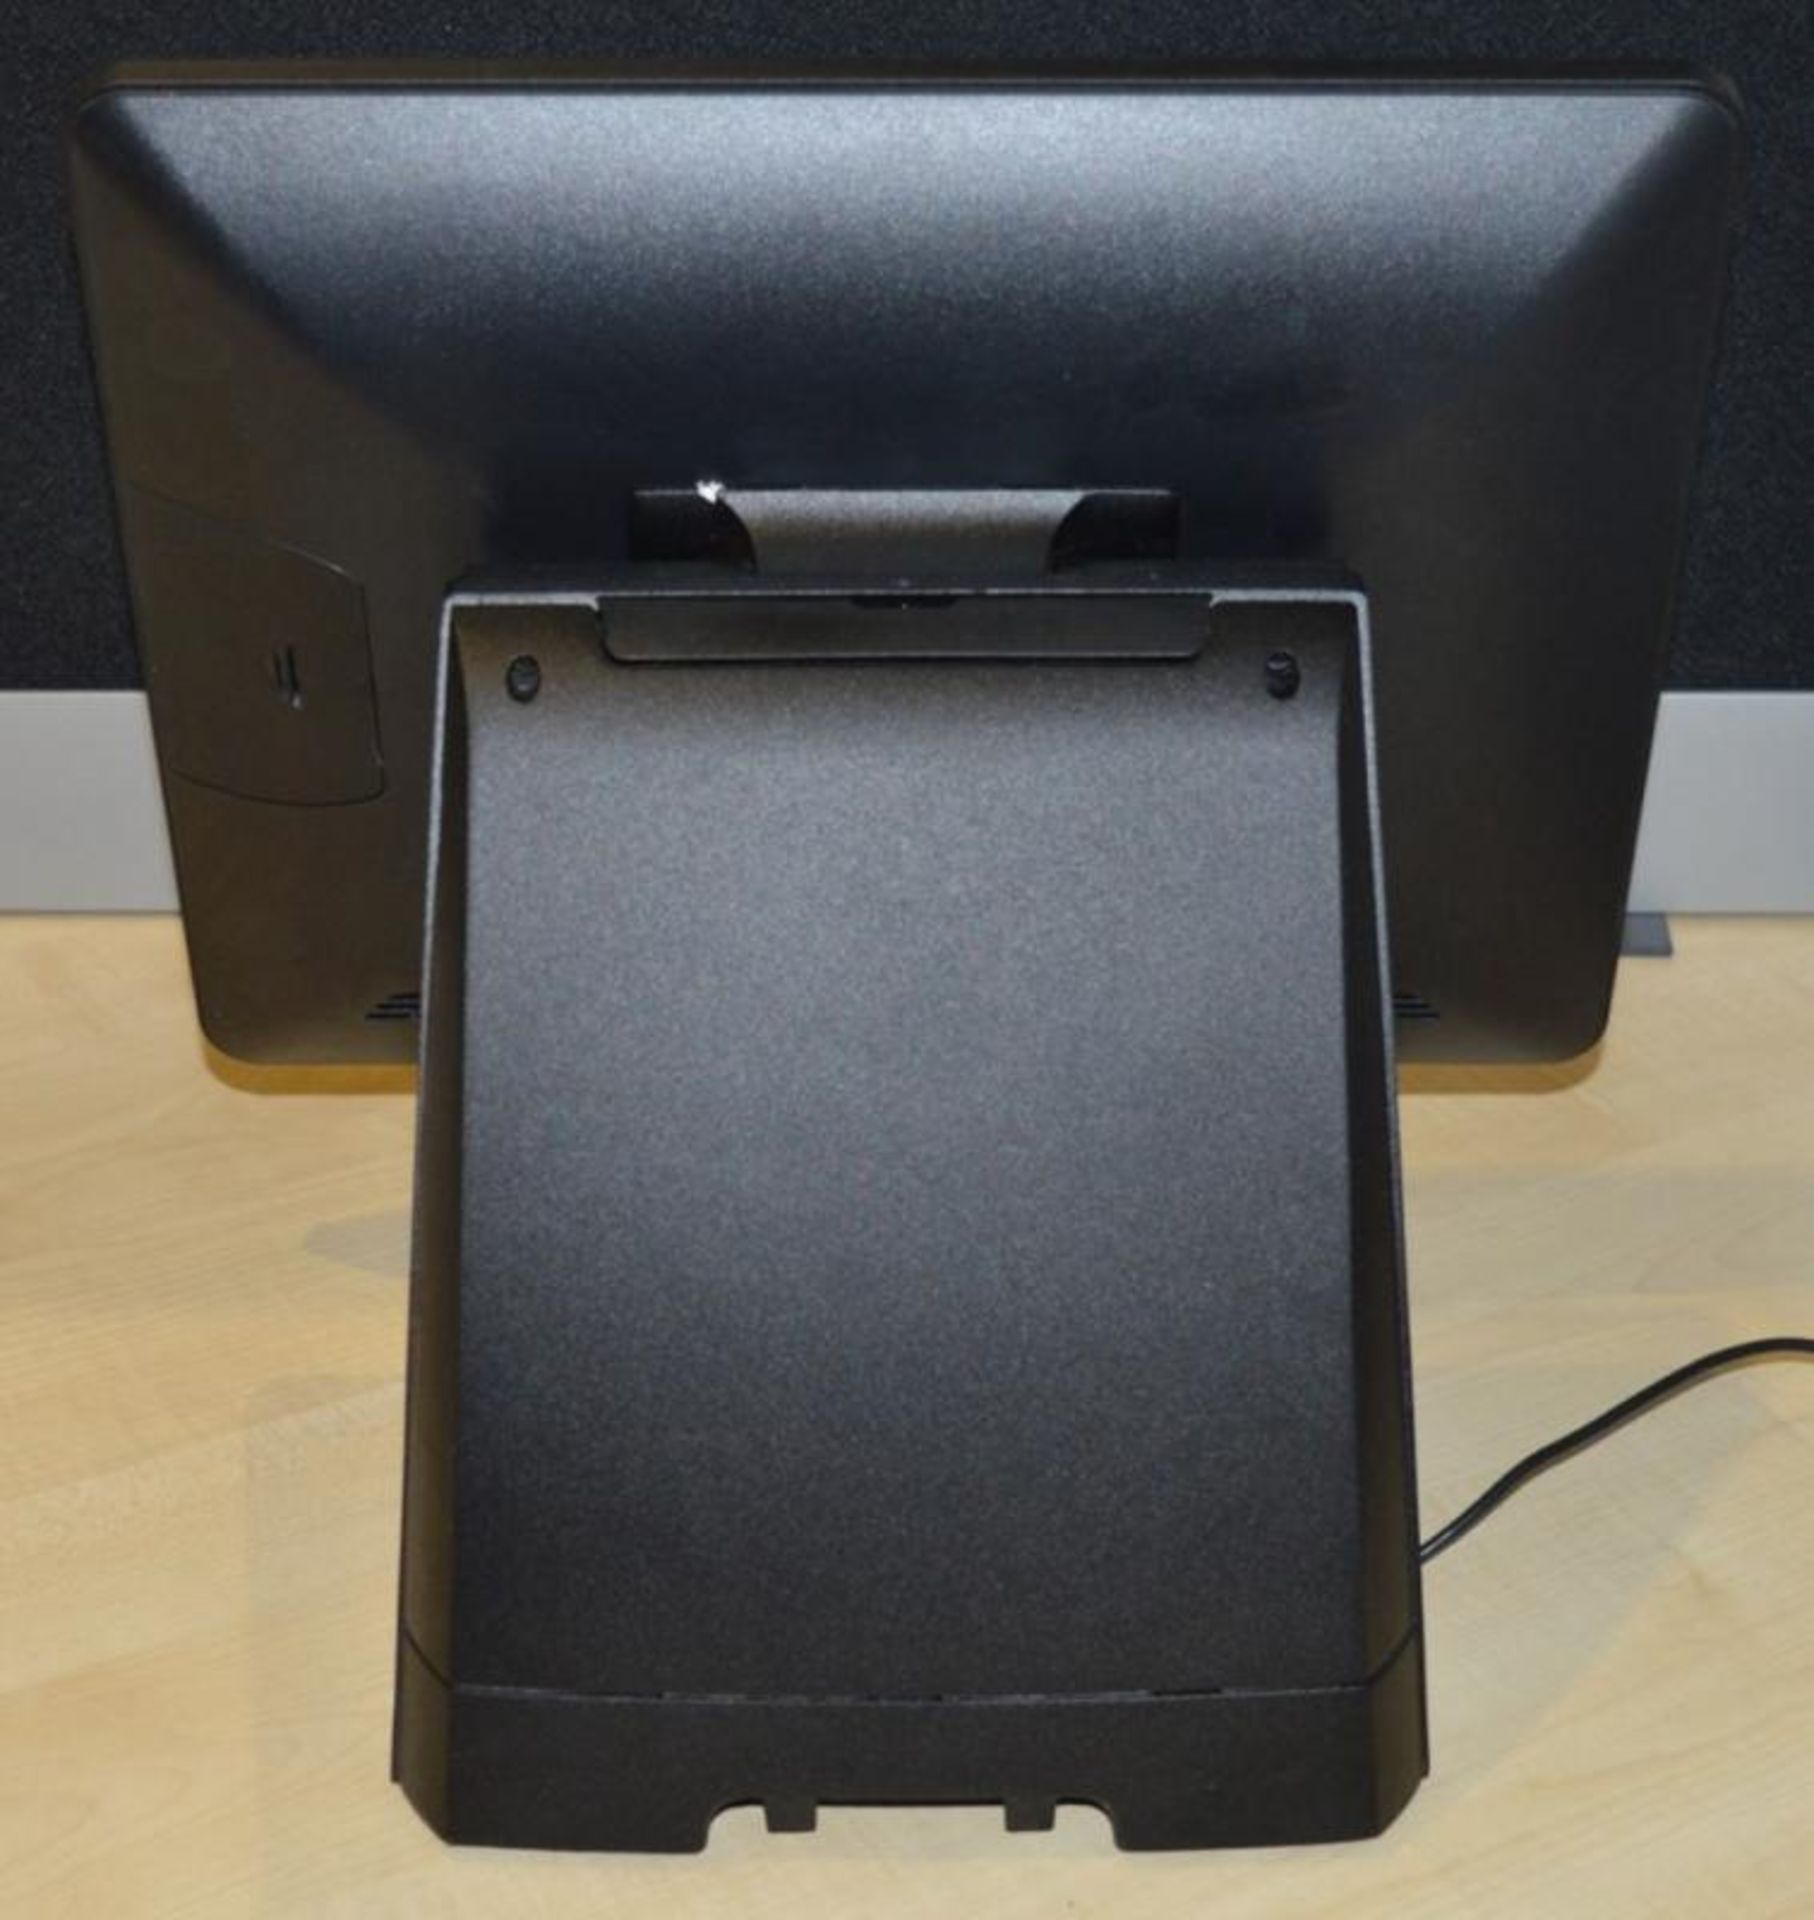 1 x Cielo AP-3615 All in One Desktop Computer POS System - Features Include 15 Inch Touch Screen, In - Image 8 of 13